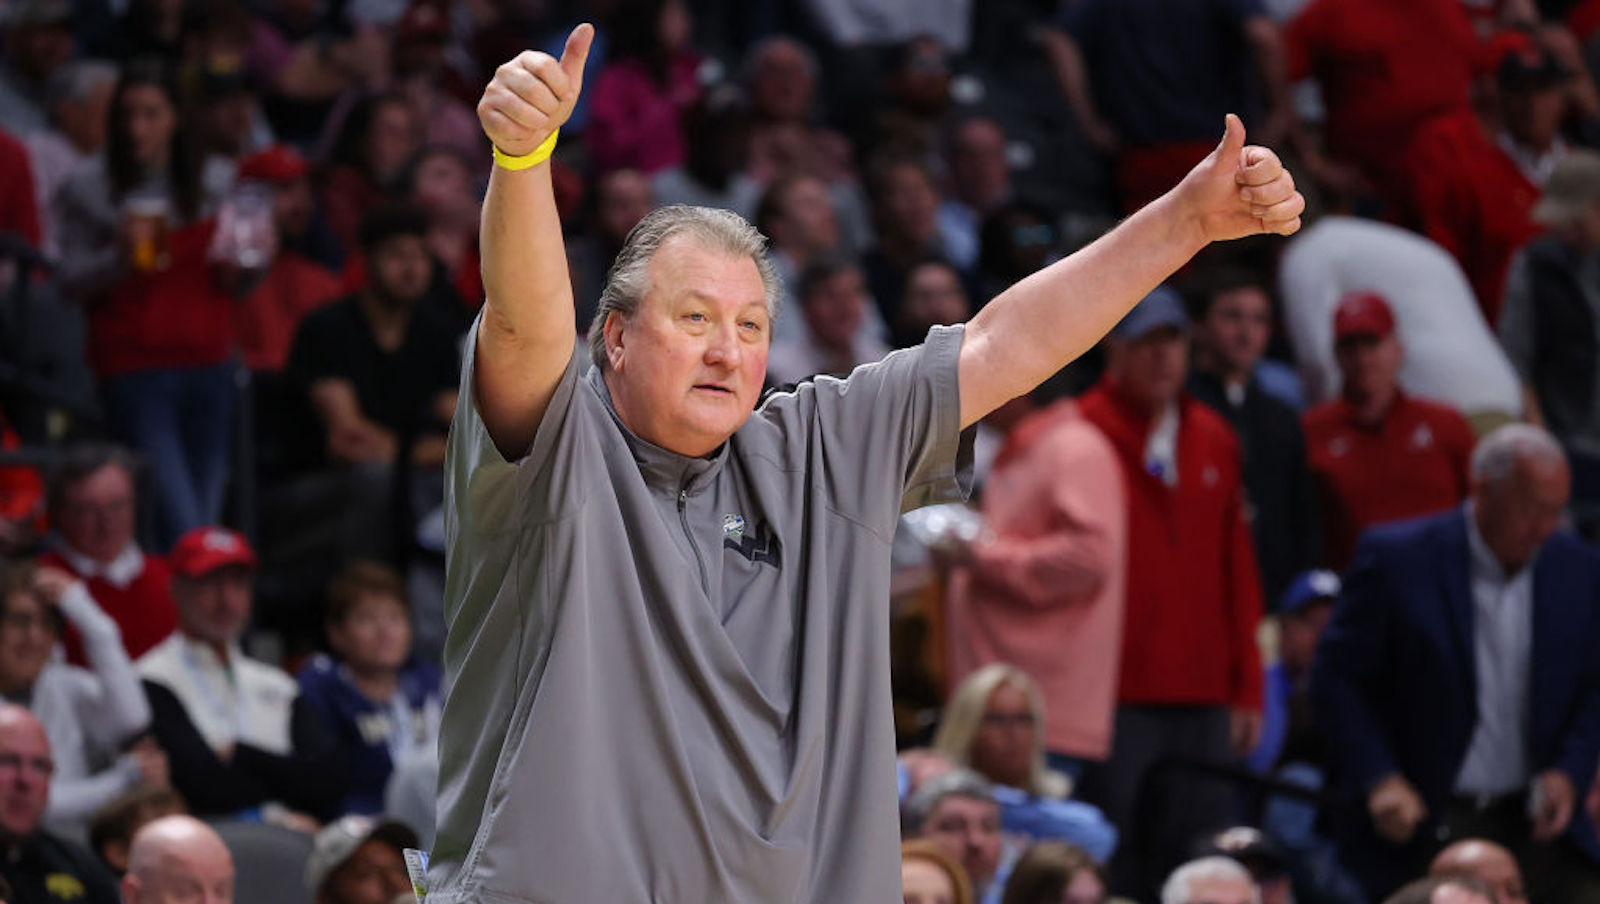 Head coach Bob Huggins of the West Virginia Mountaineers reacts during the second half against the Maryland Terrapins in the first round of the NCAA Men's Basketball Tournament at Legacy Arena at the BJCC on March 16, 2023 in Birmingham, Alabama.